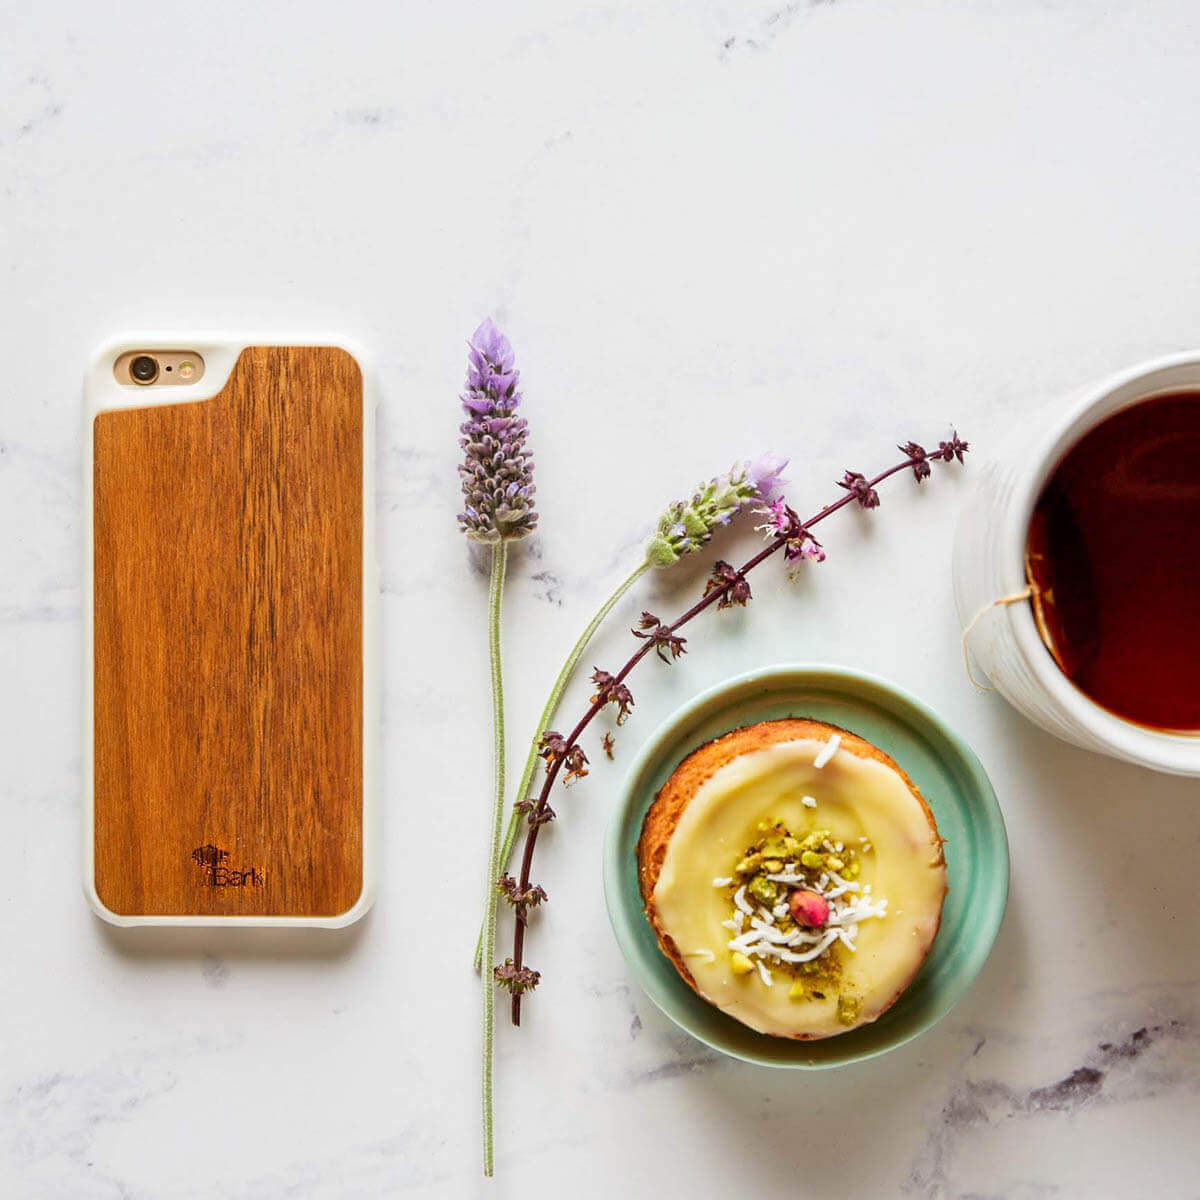 Top view of cellphone with wood cover next to a cup of tea and breakfast muffin